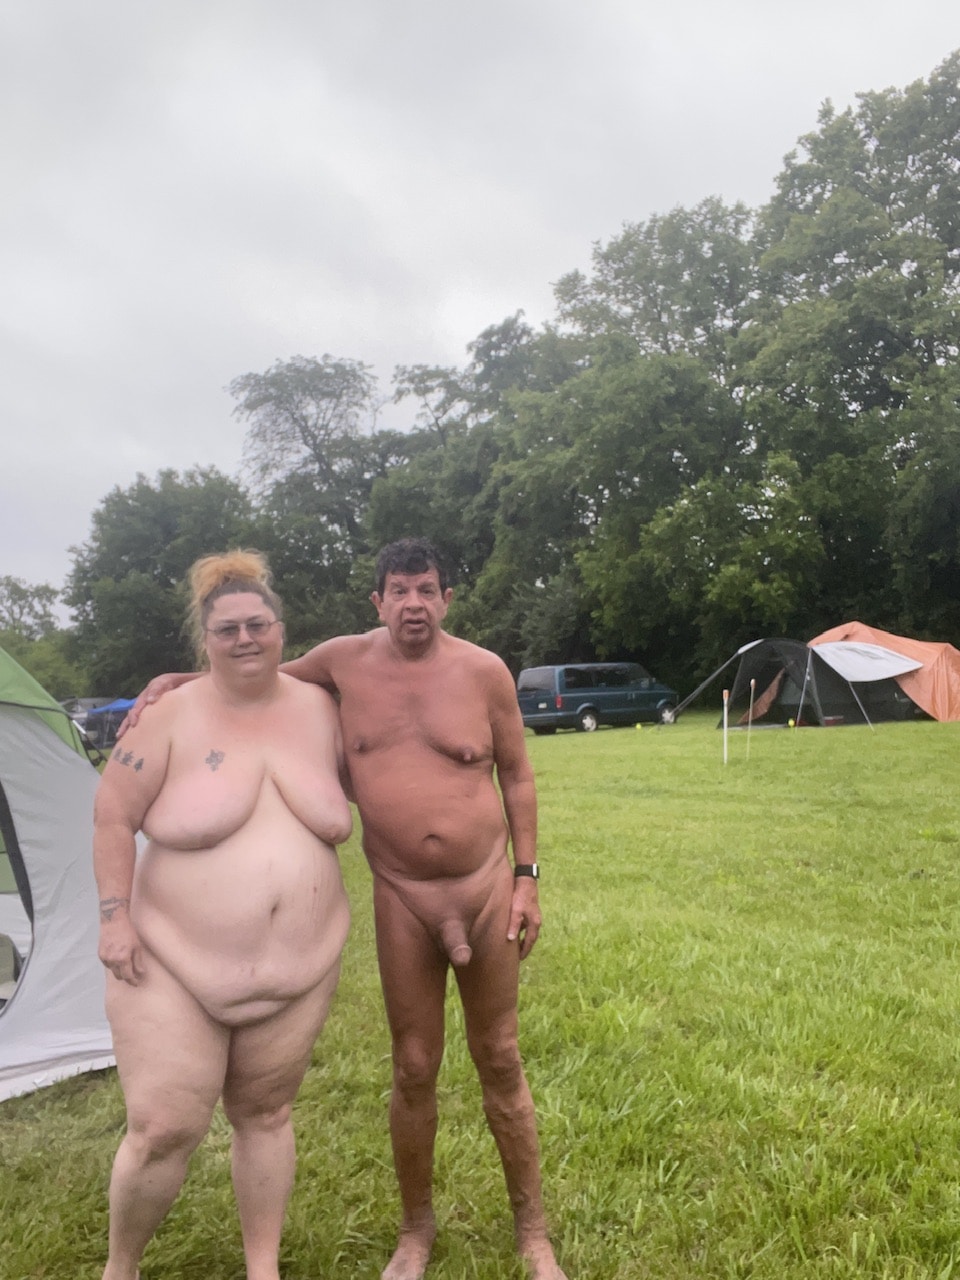 family camp nudits - We love camping in the nude - Real Amateurs